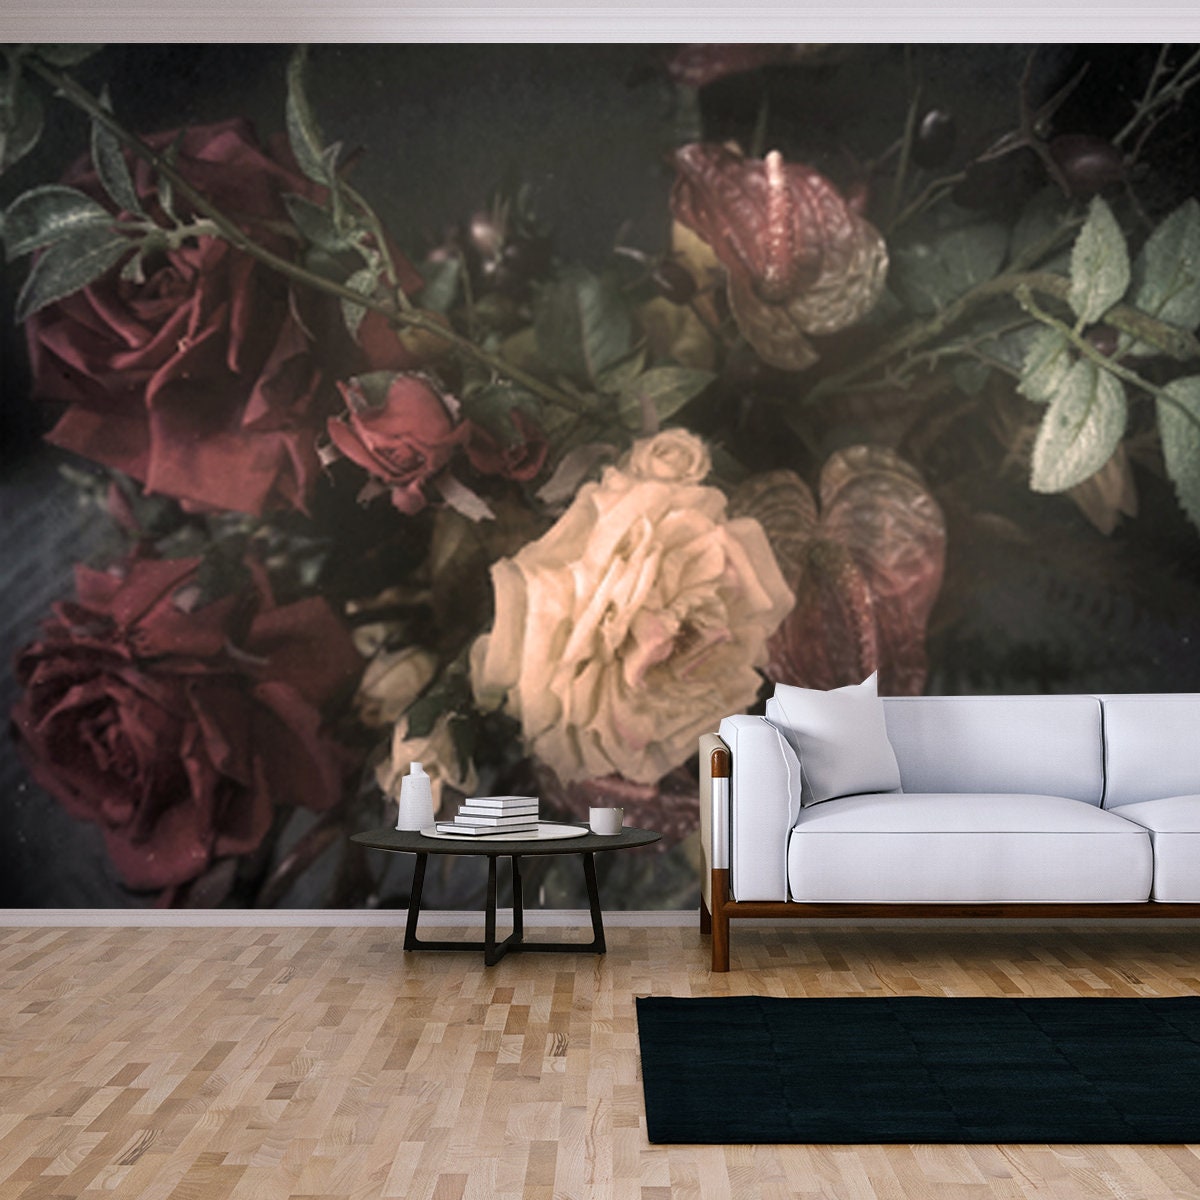 Vintage Bouquet of Roses Background, Flowers Stylized and Filtered to Look Like an Old Painting Wallpaper Living Room Mural